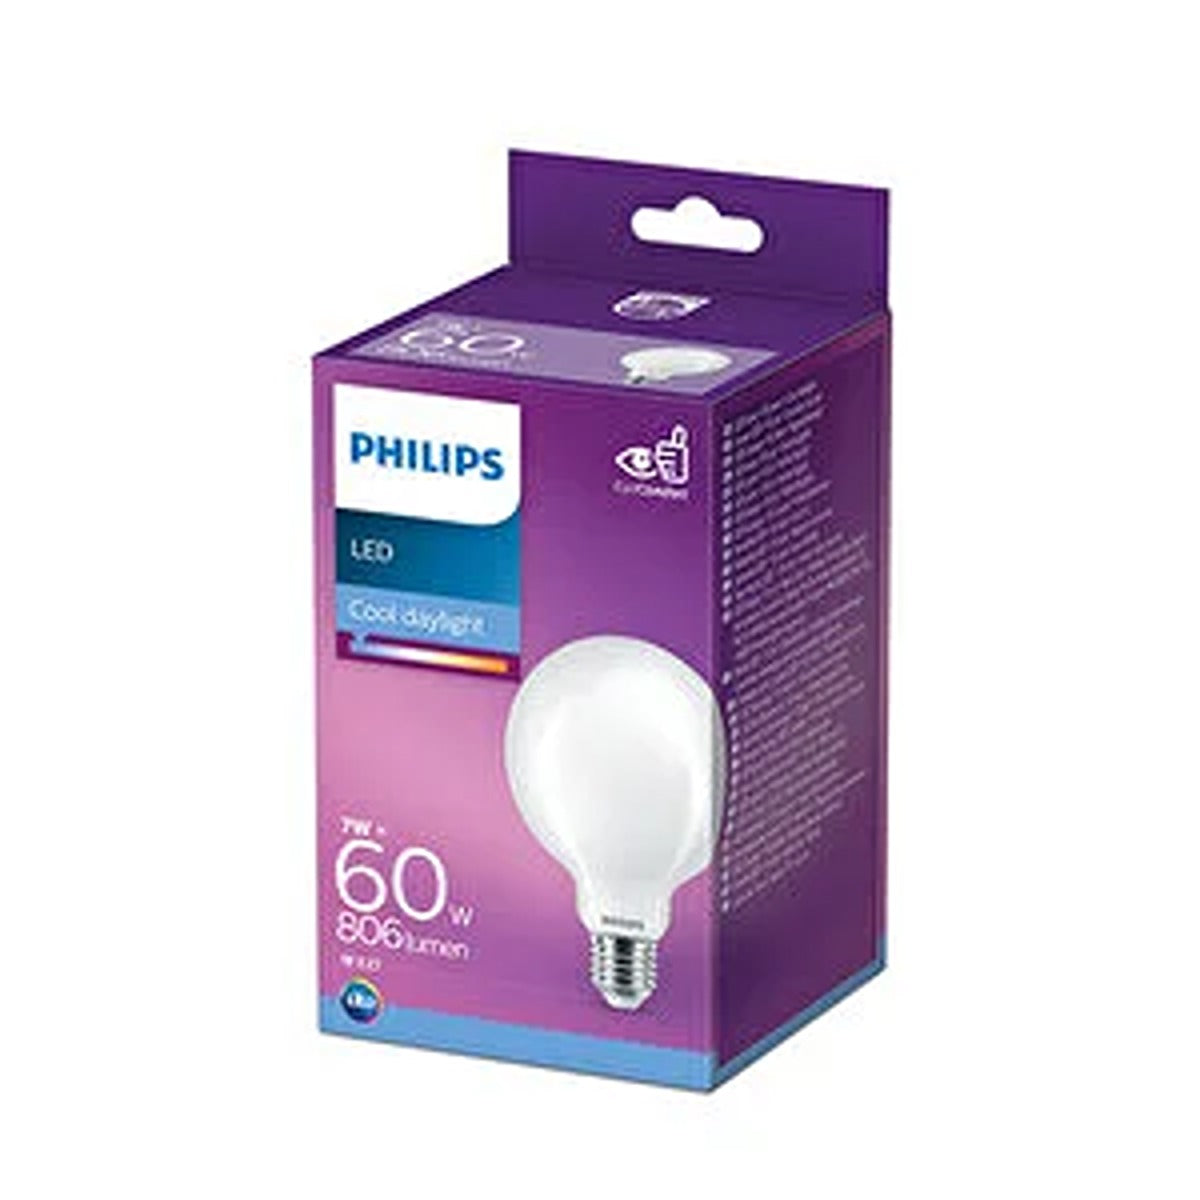 Philips - LED Bayonet Light Bulb 60W - White - Continental Food Store